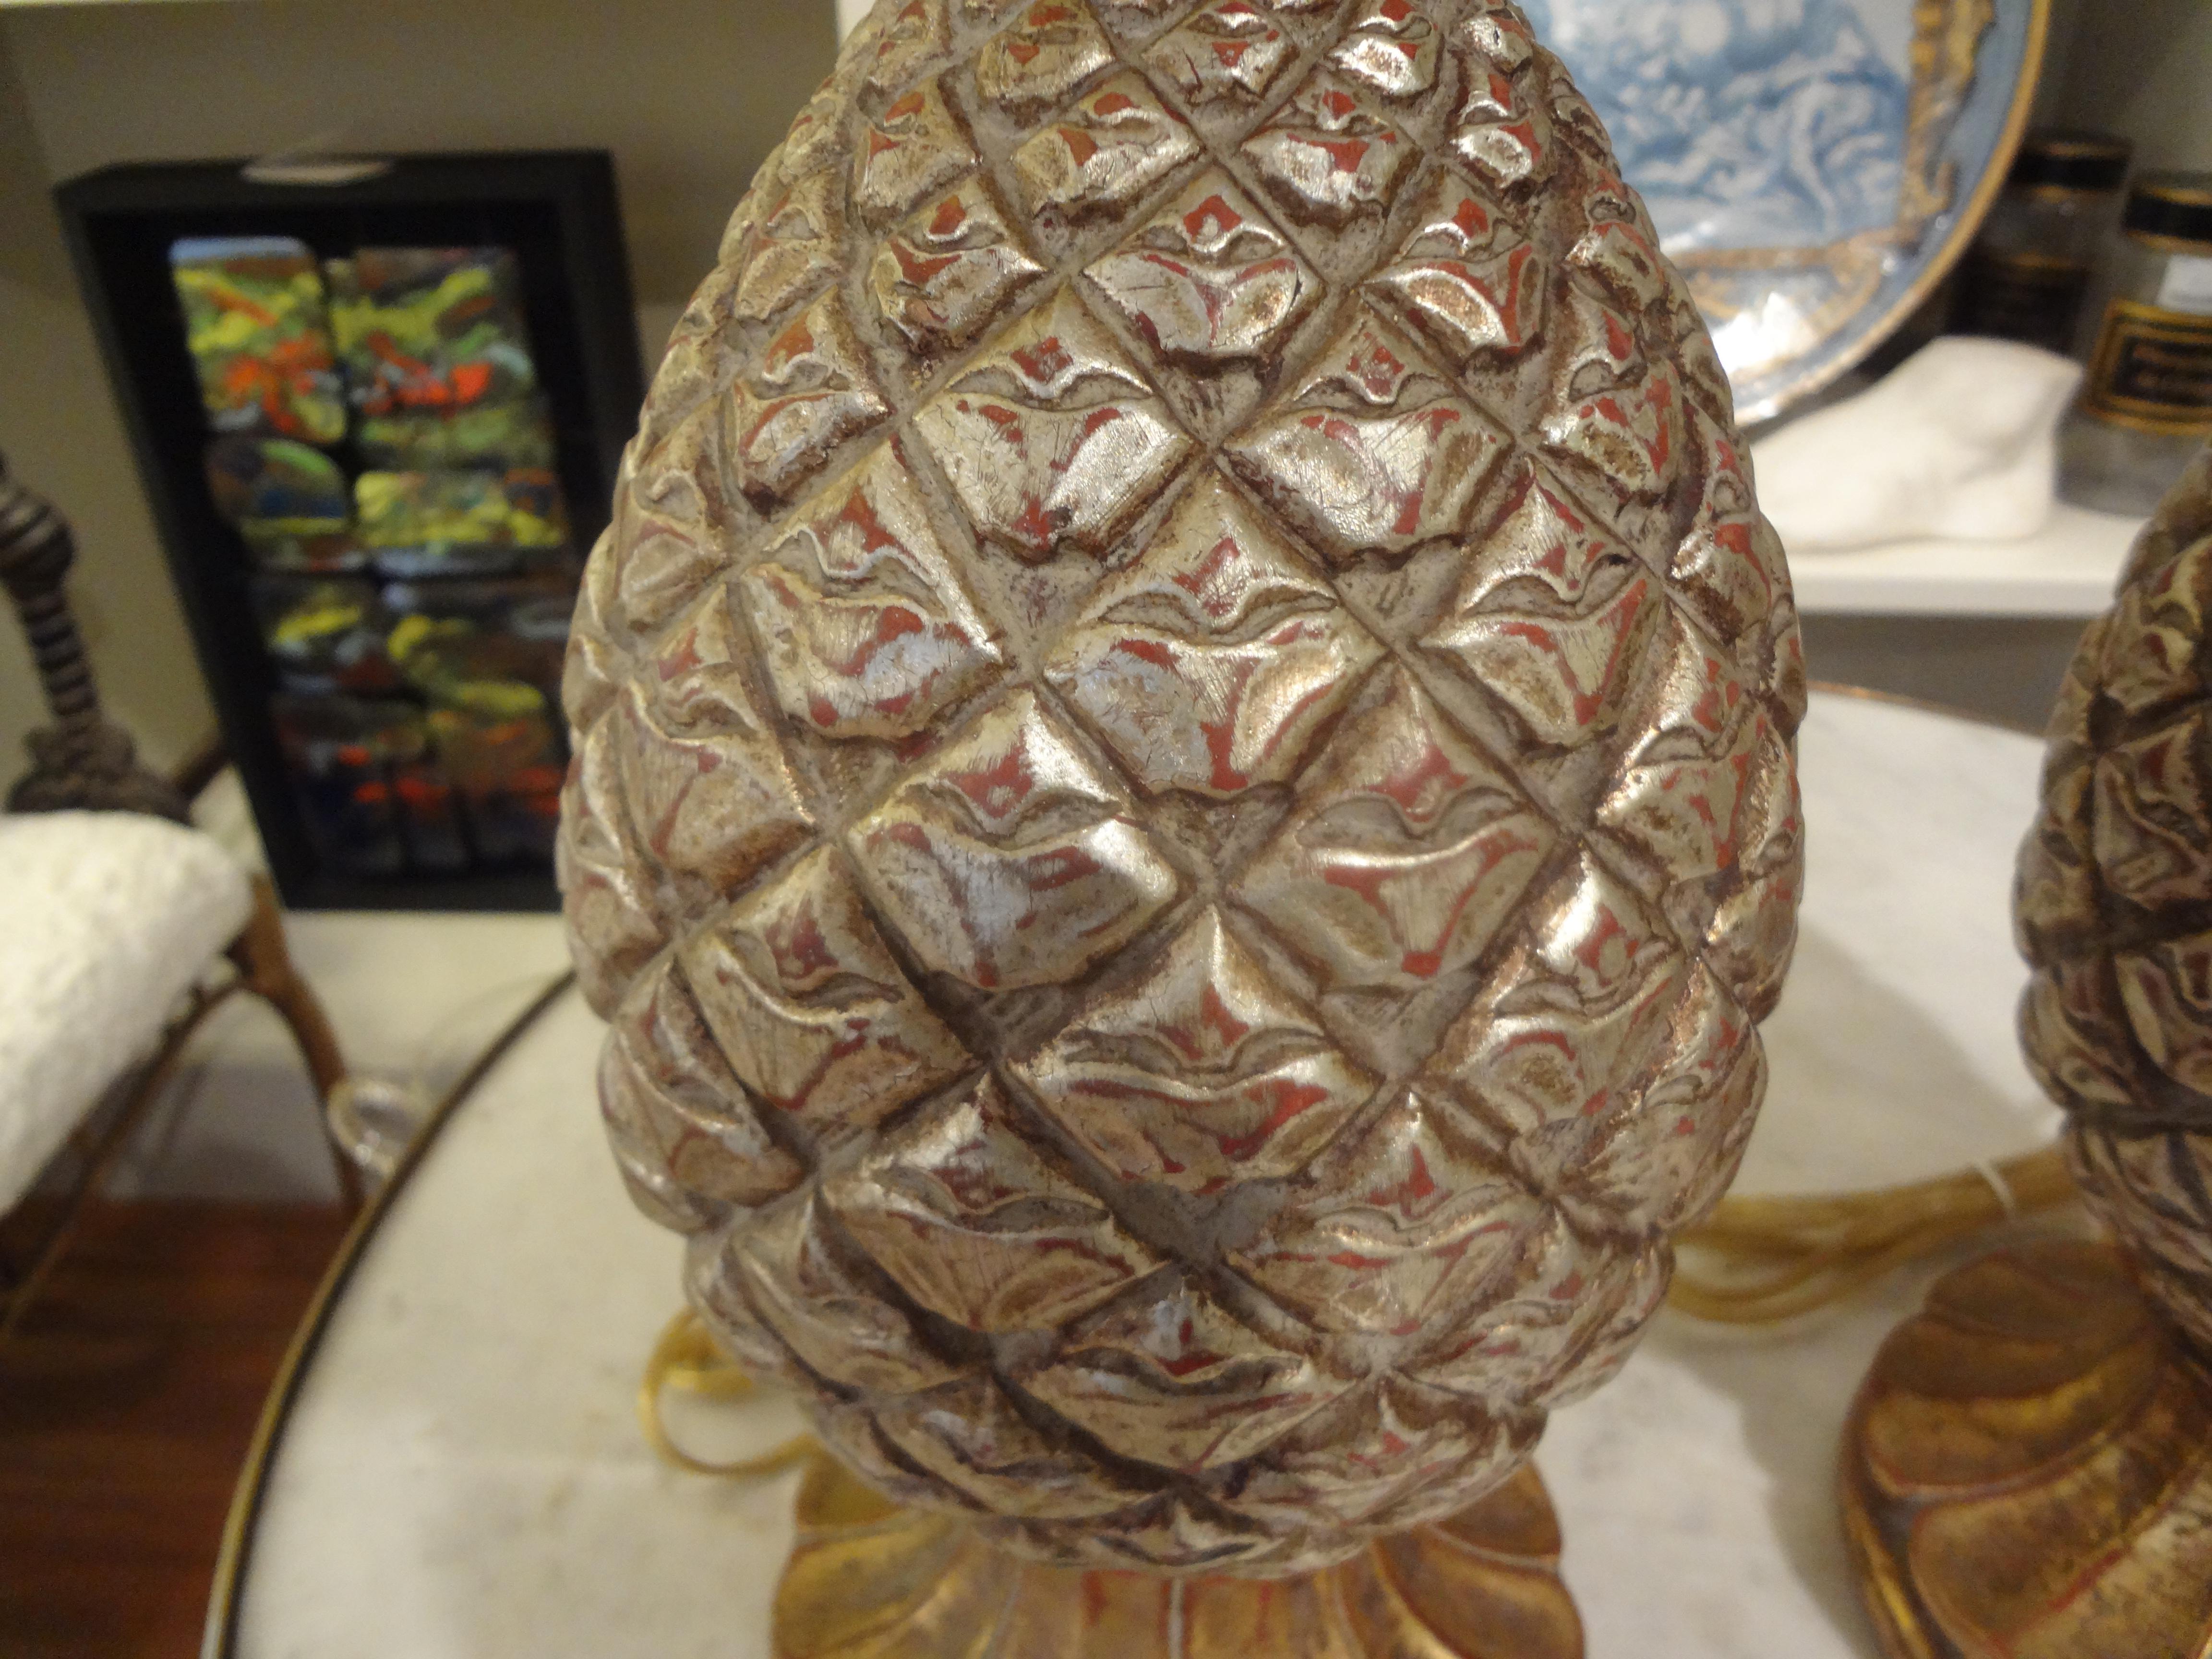 pineapple lamps for sale